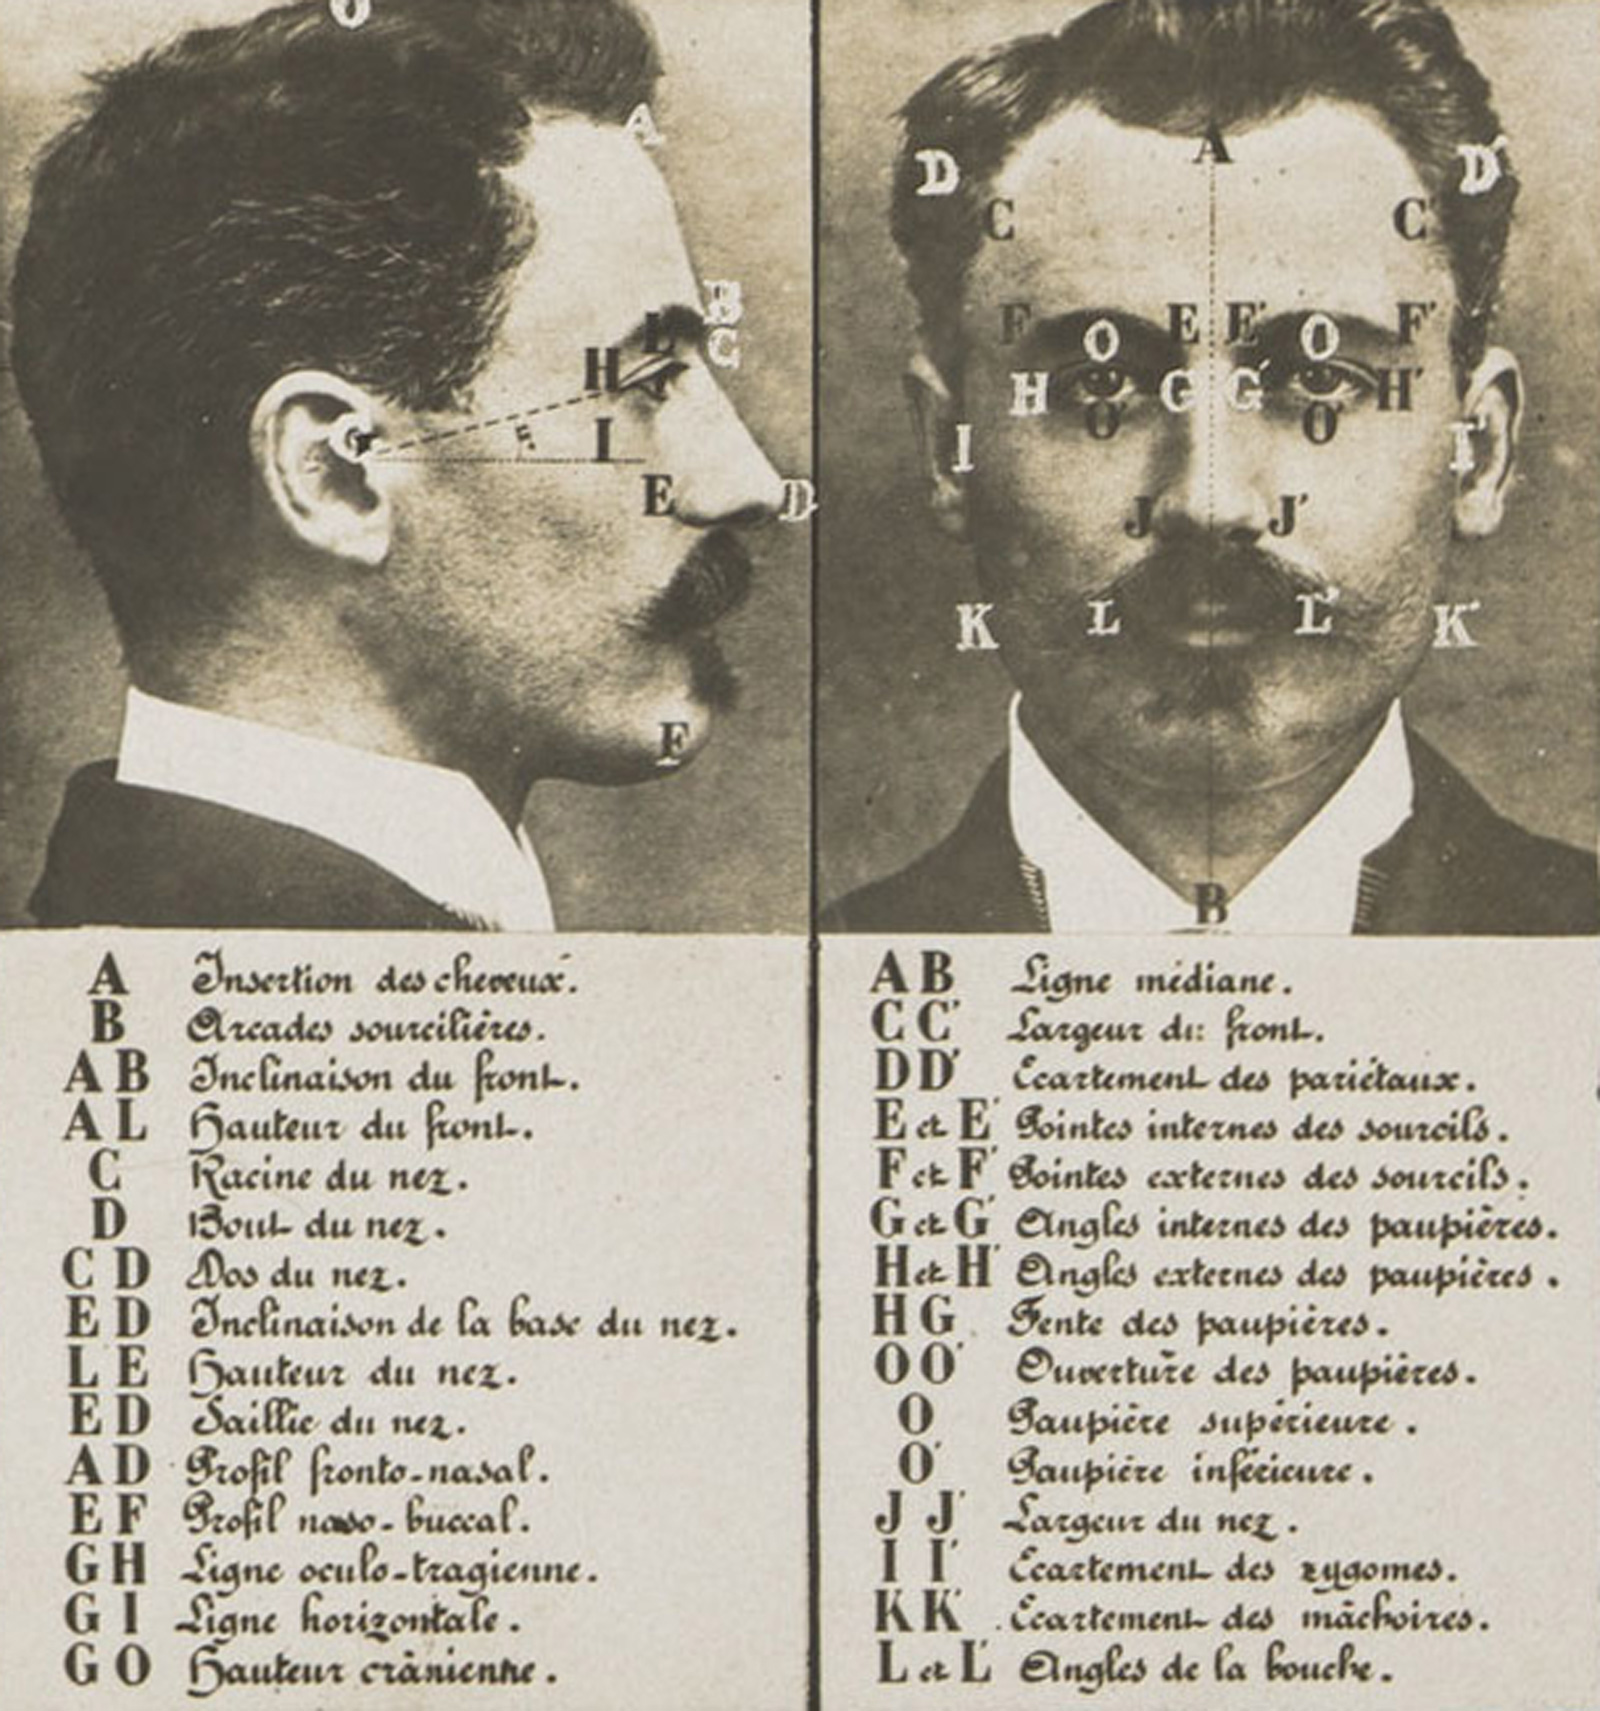 Diagram of a White man’s face and profile with letters pointing out various characteristics